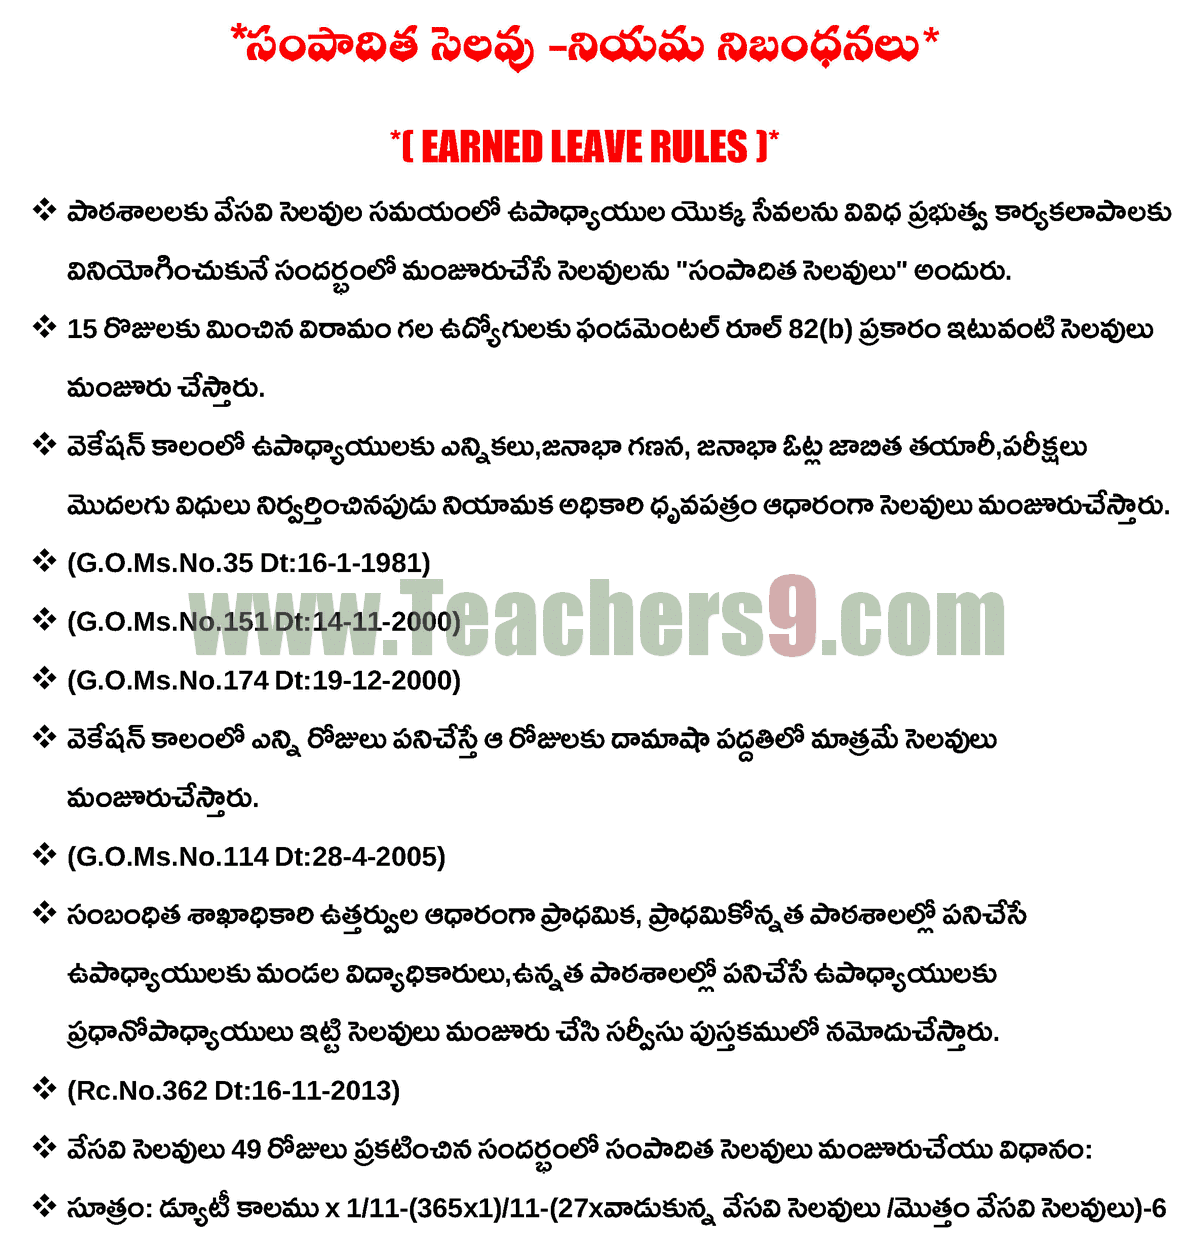 Earned Leave Rules in Telugu, Ready Reckoner and online calculator for E.L's